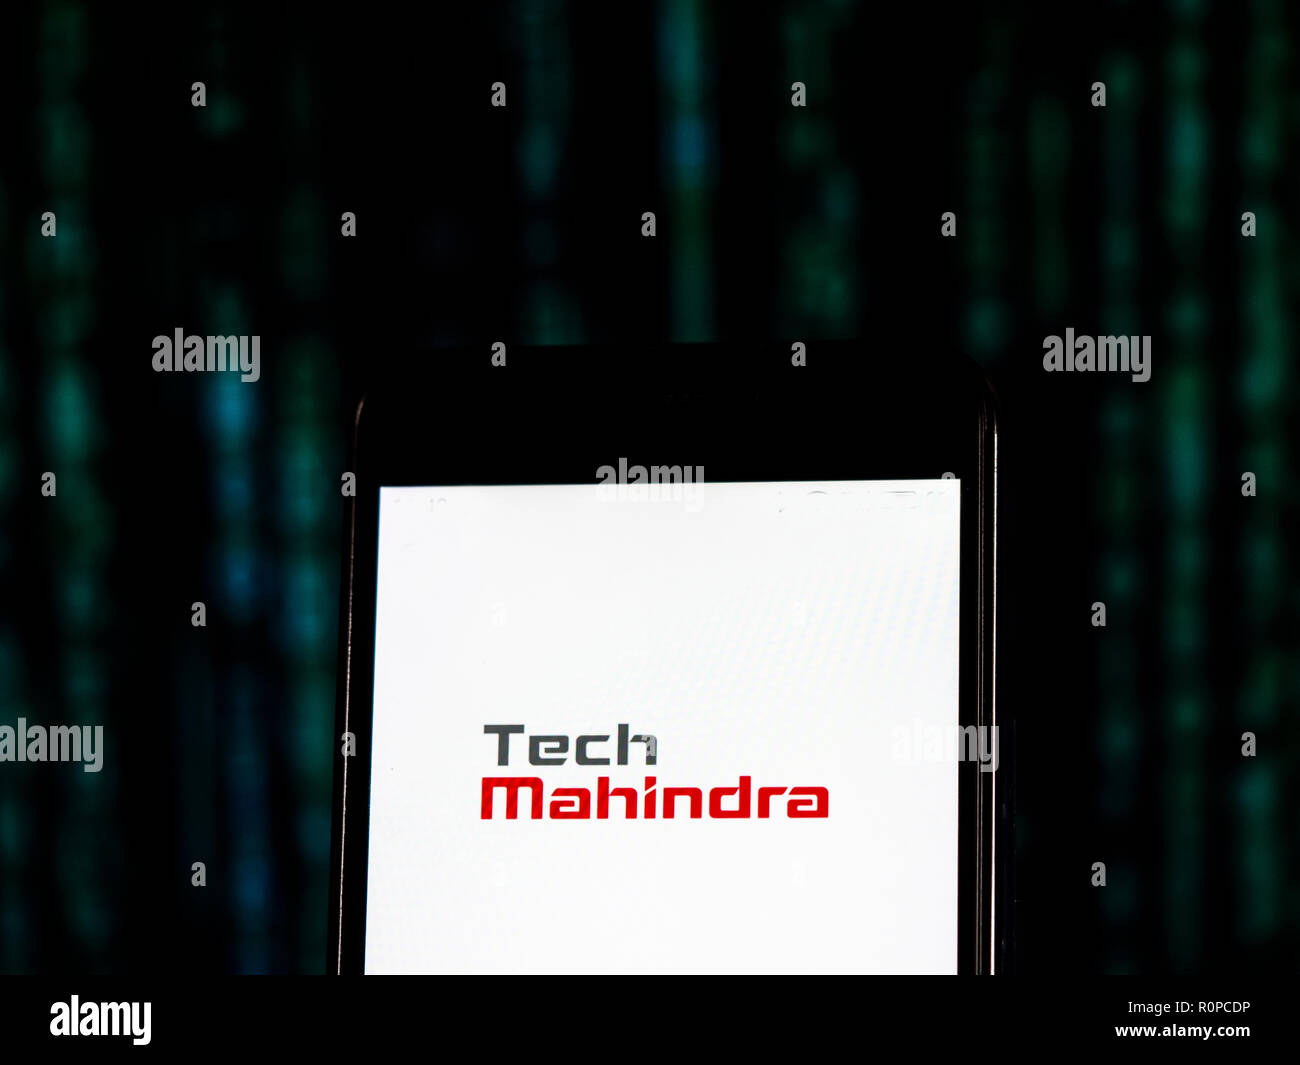 Tech Mahindra Information technology company logo seen displayed on smart phone. Tech Mahindra Limited is an Indian multinational provider of information technology, networking technology solutions and Business Process Outsourcing to various industry verticals and horizontals. Stock Photo